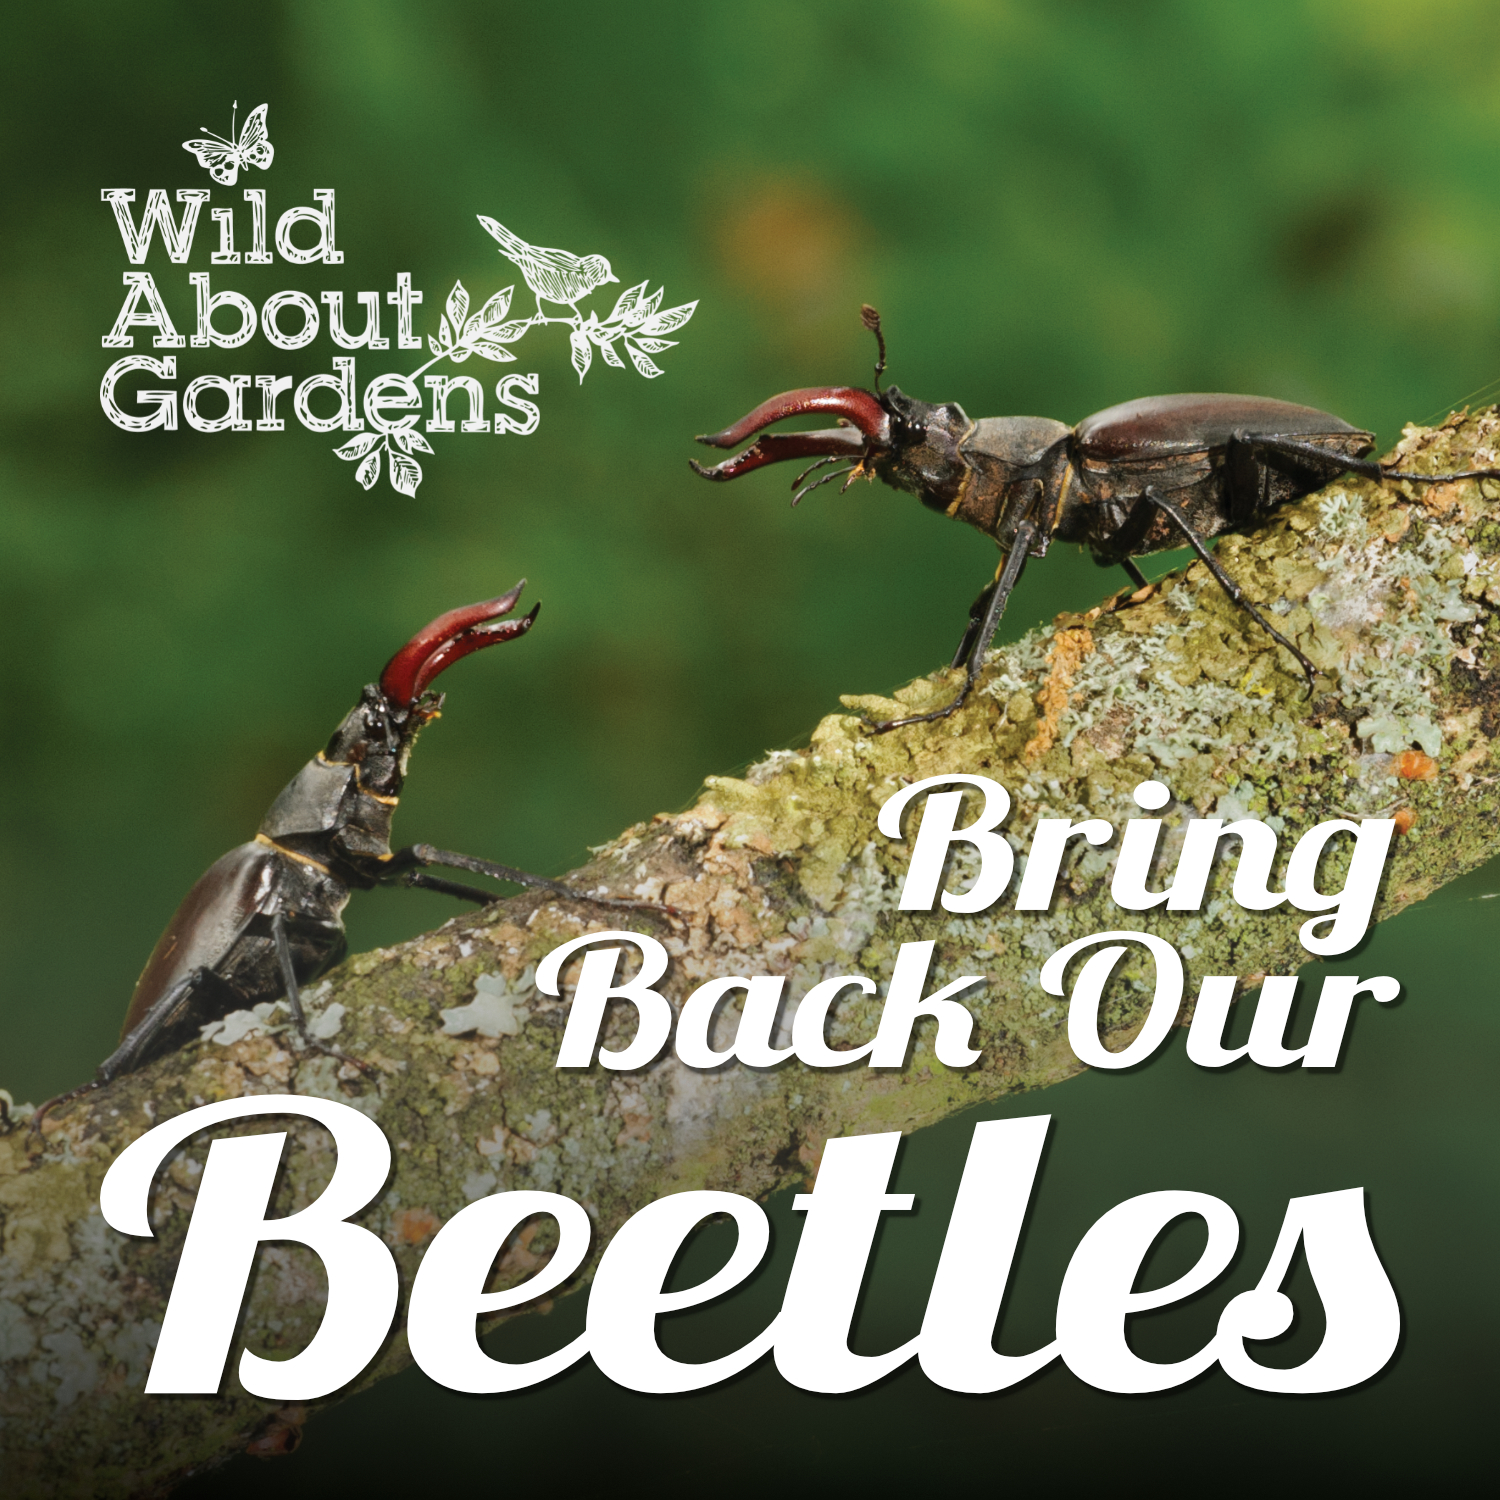 Two male stag beetles, with their great jaws raised, face up to each other on a branch. They will fight for females and territory using their antler-like jaws. Text reads 'Bring Back our Beetles'.